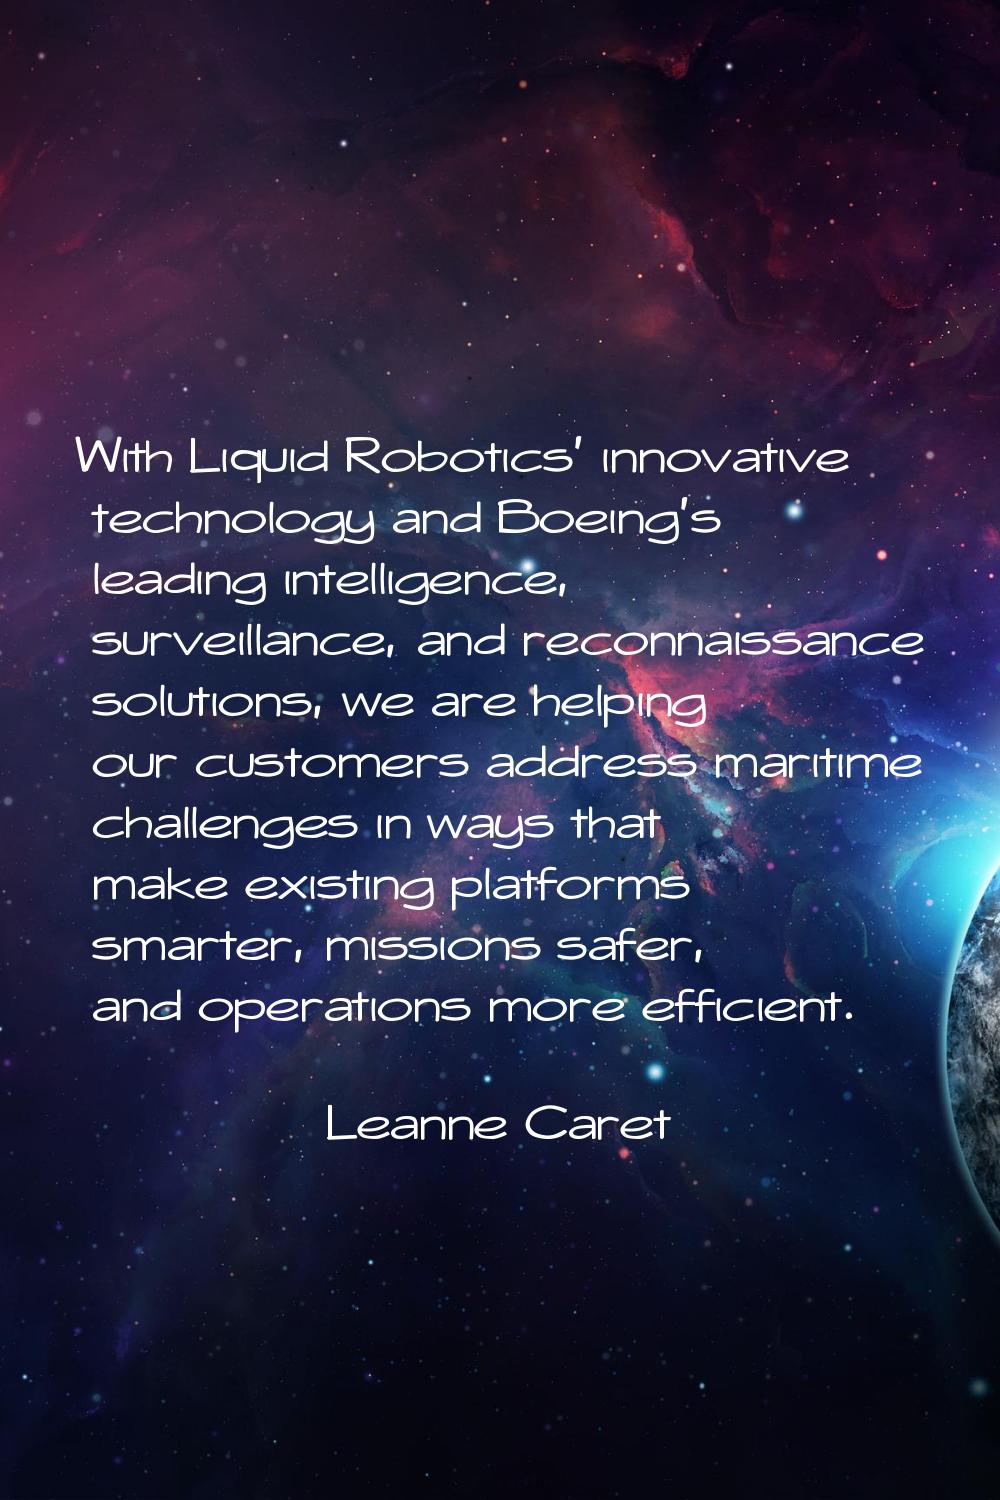 With Liquid Robotics' innovative technology and Boeing's leading intelligence, surveillance, and re